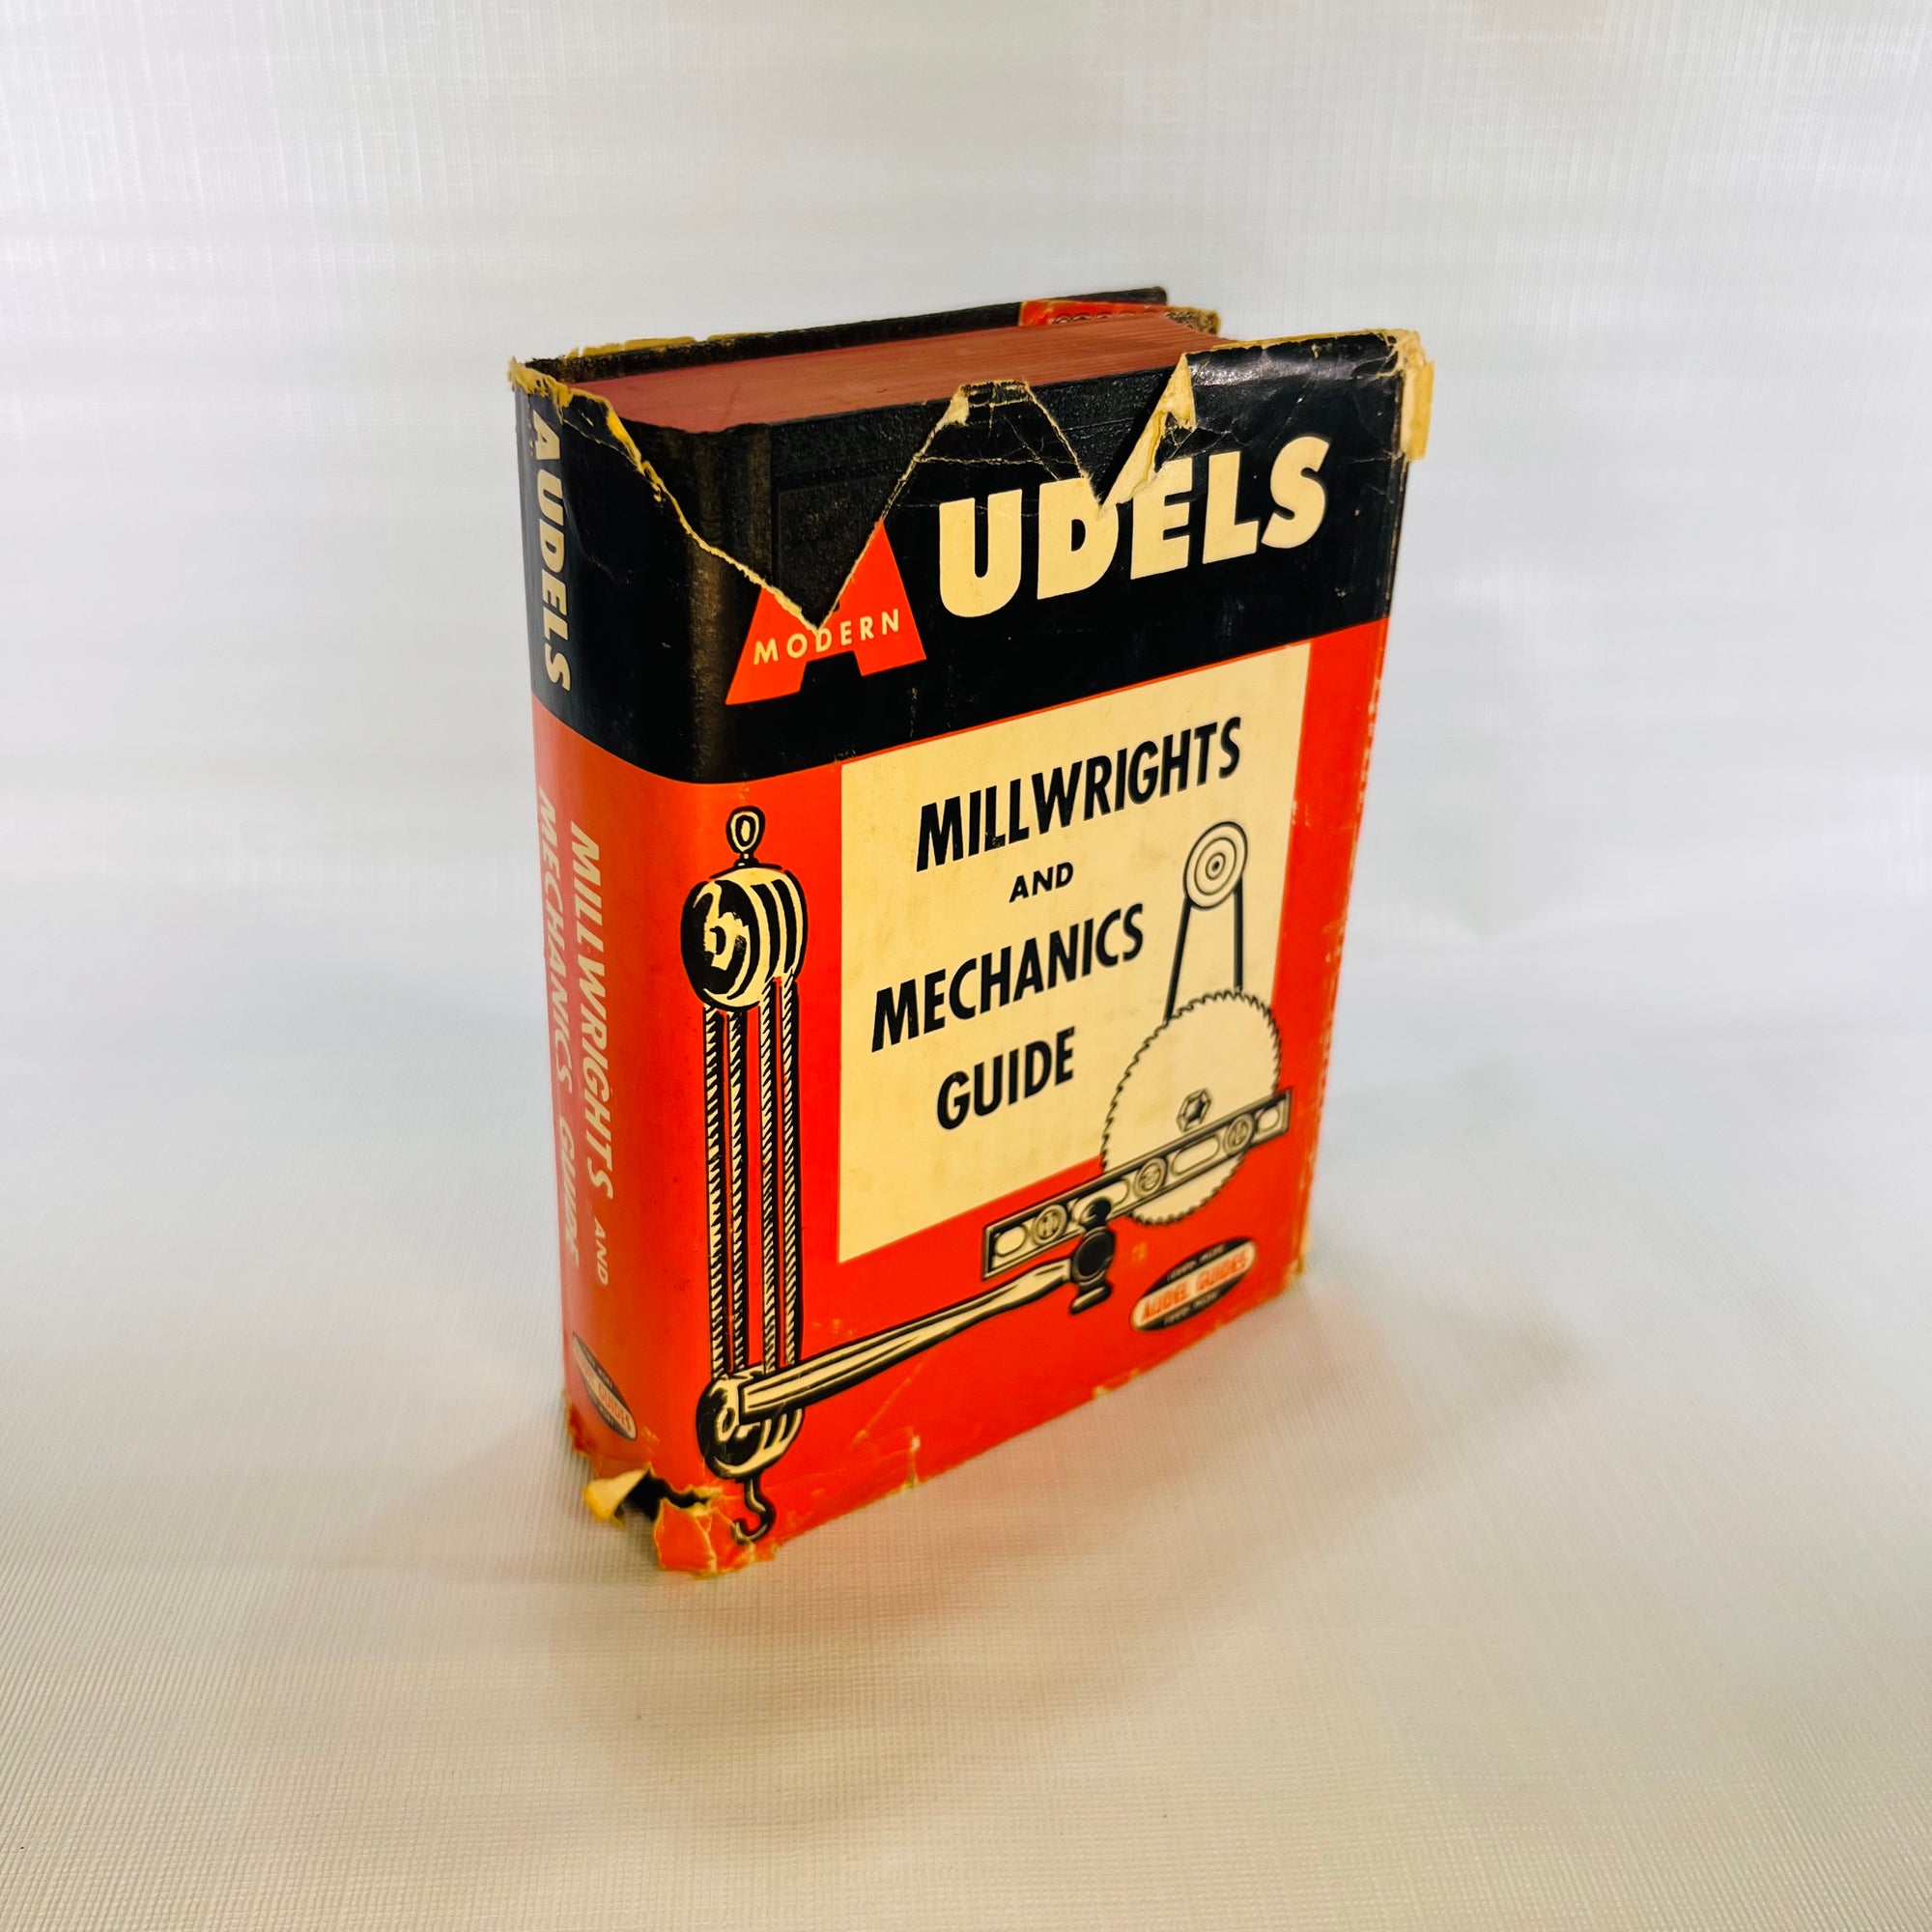 Audels Millwrights & Mechanics Guide by E.P. Anderson 1960-Reading Vintage